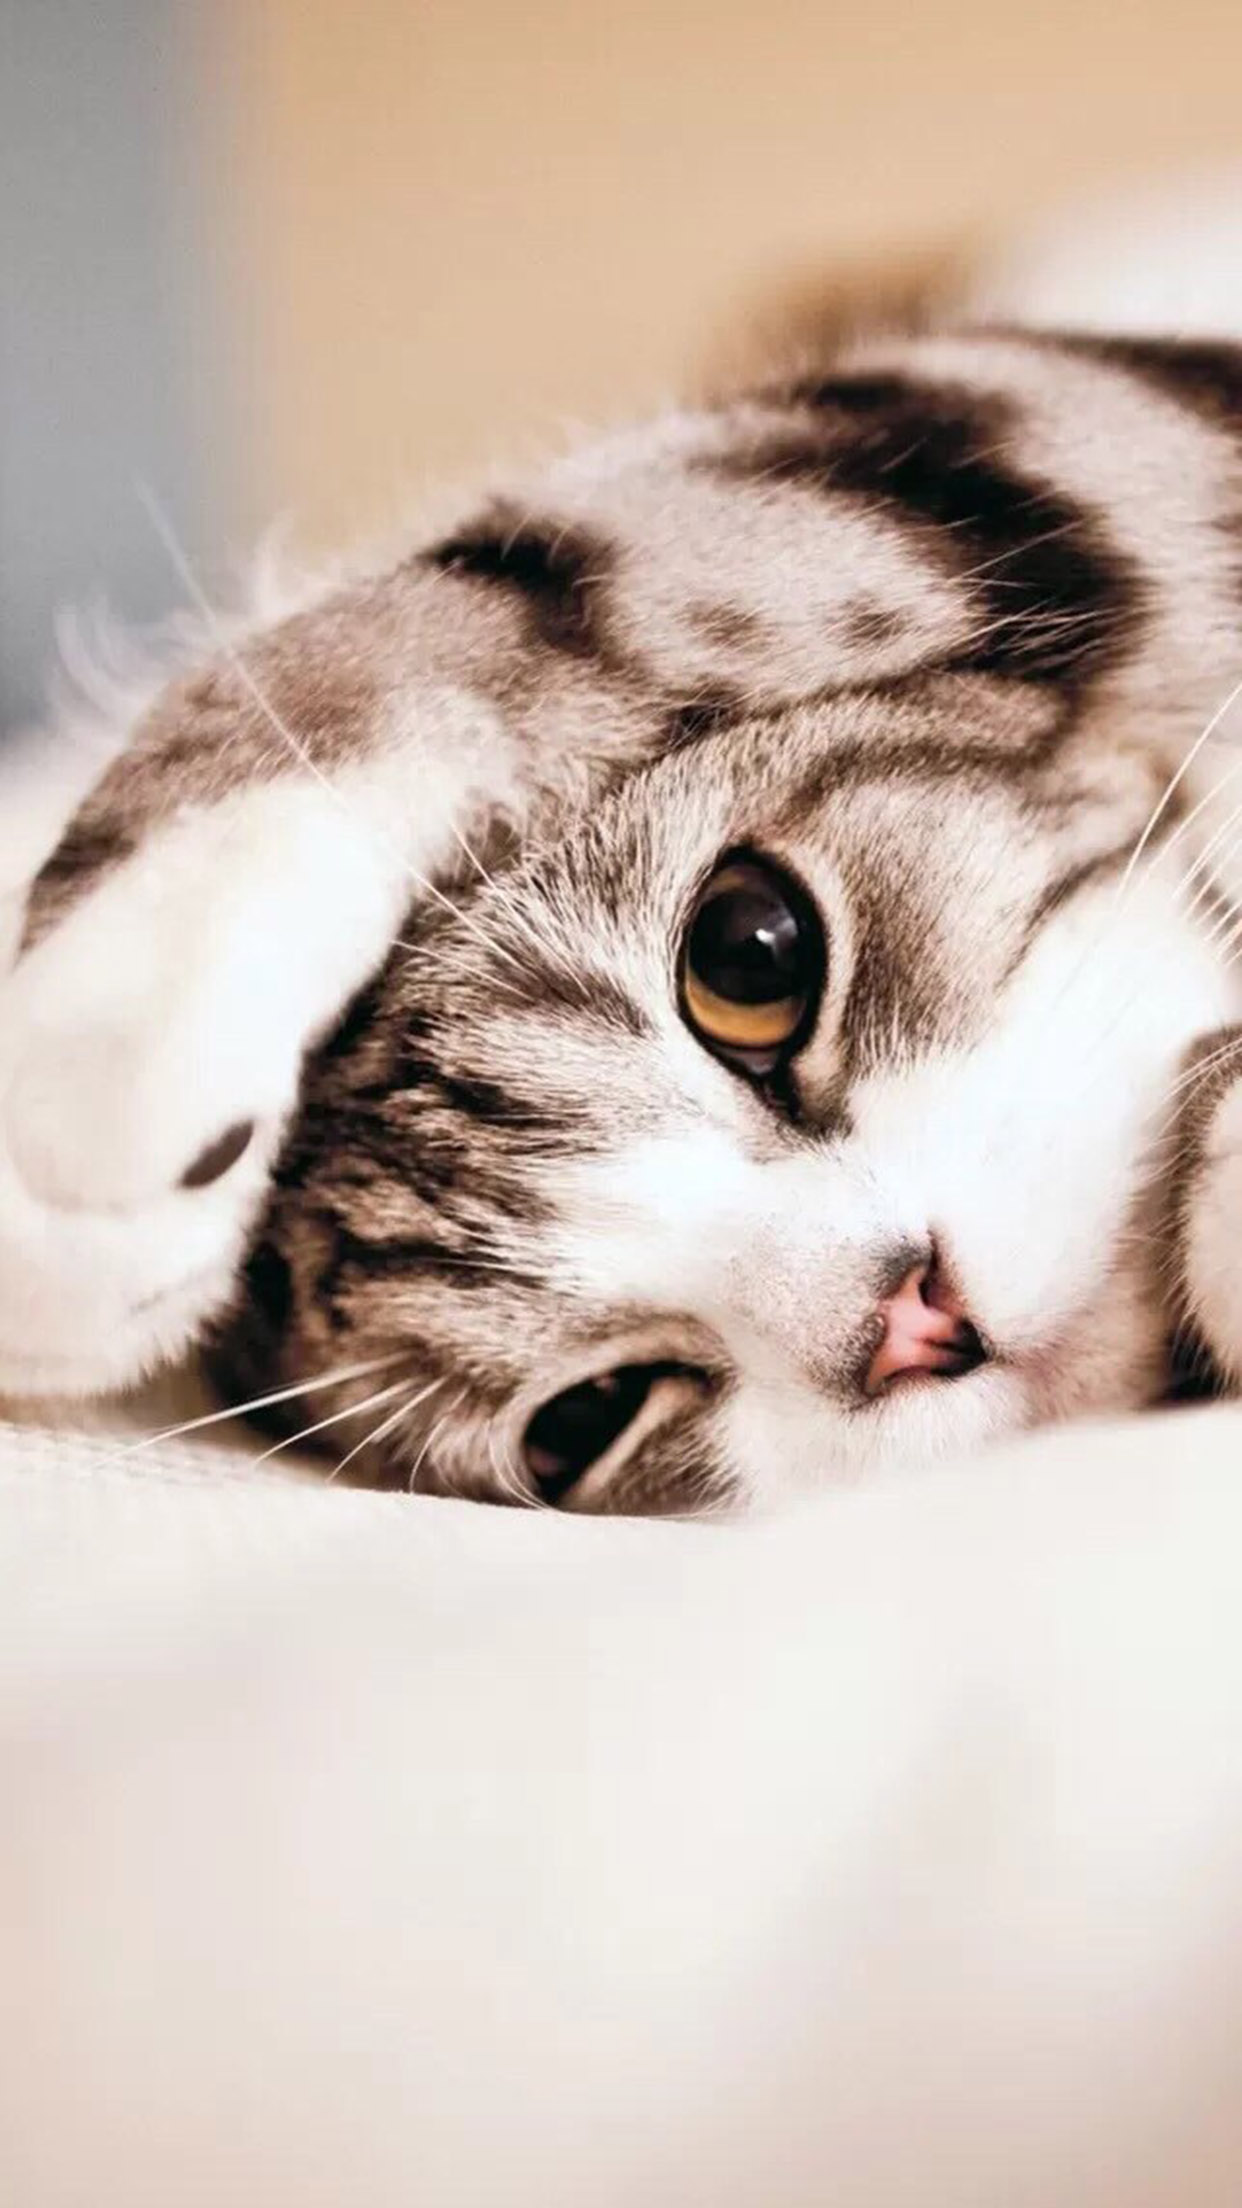 Cat 2 Wallpaper for iPhone Pro Max, X, 6